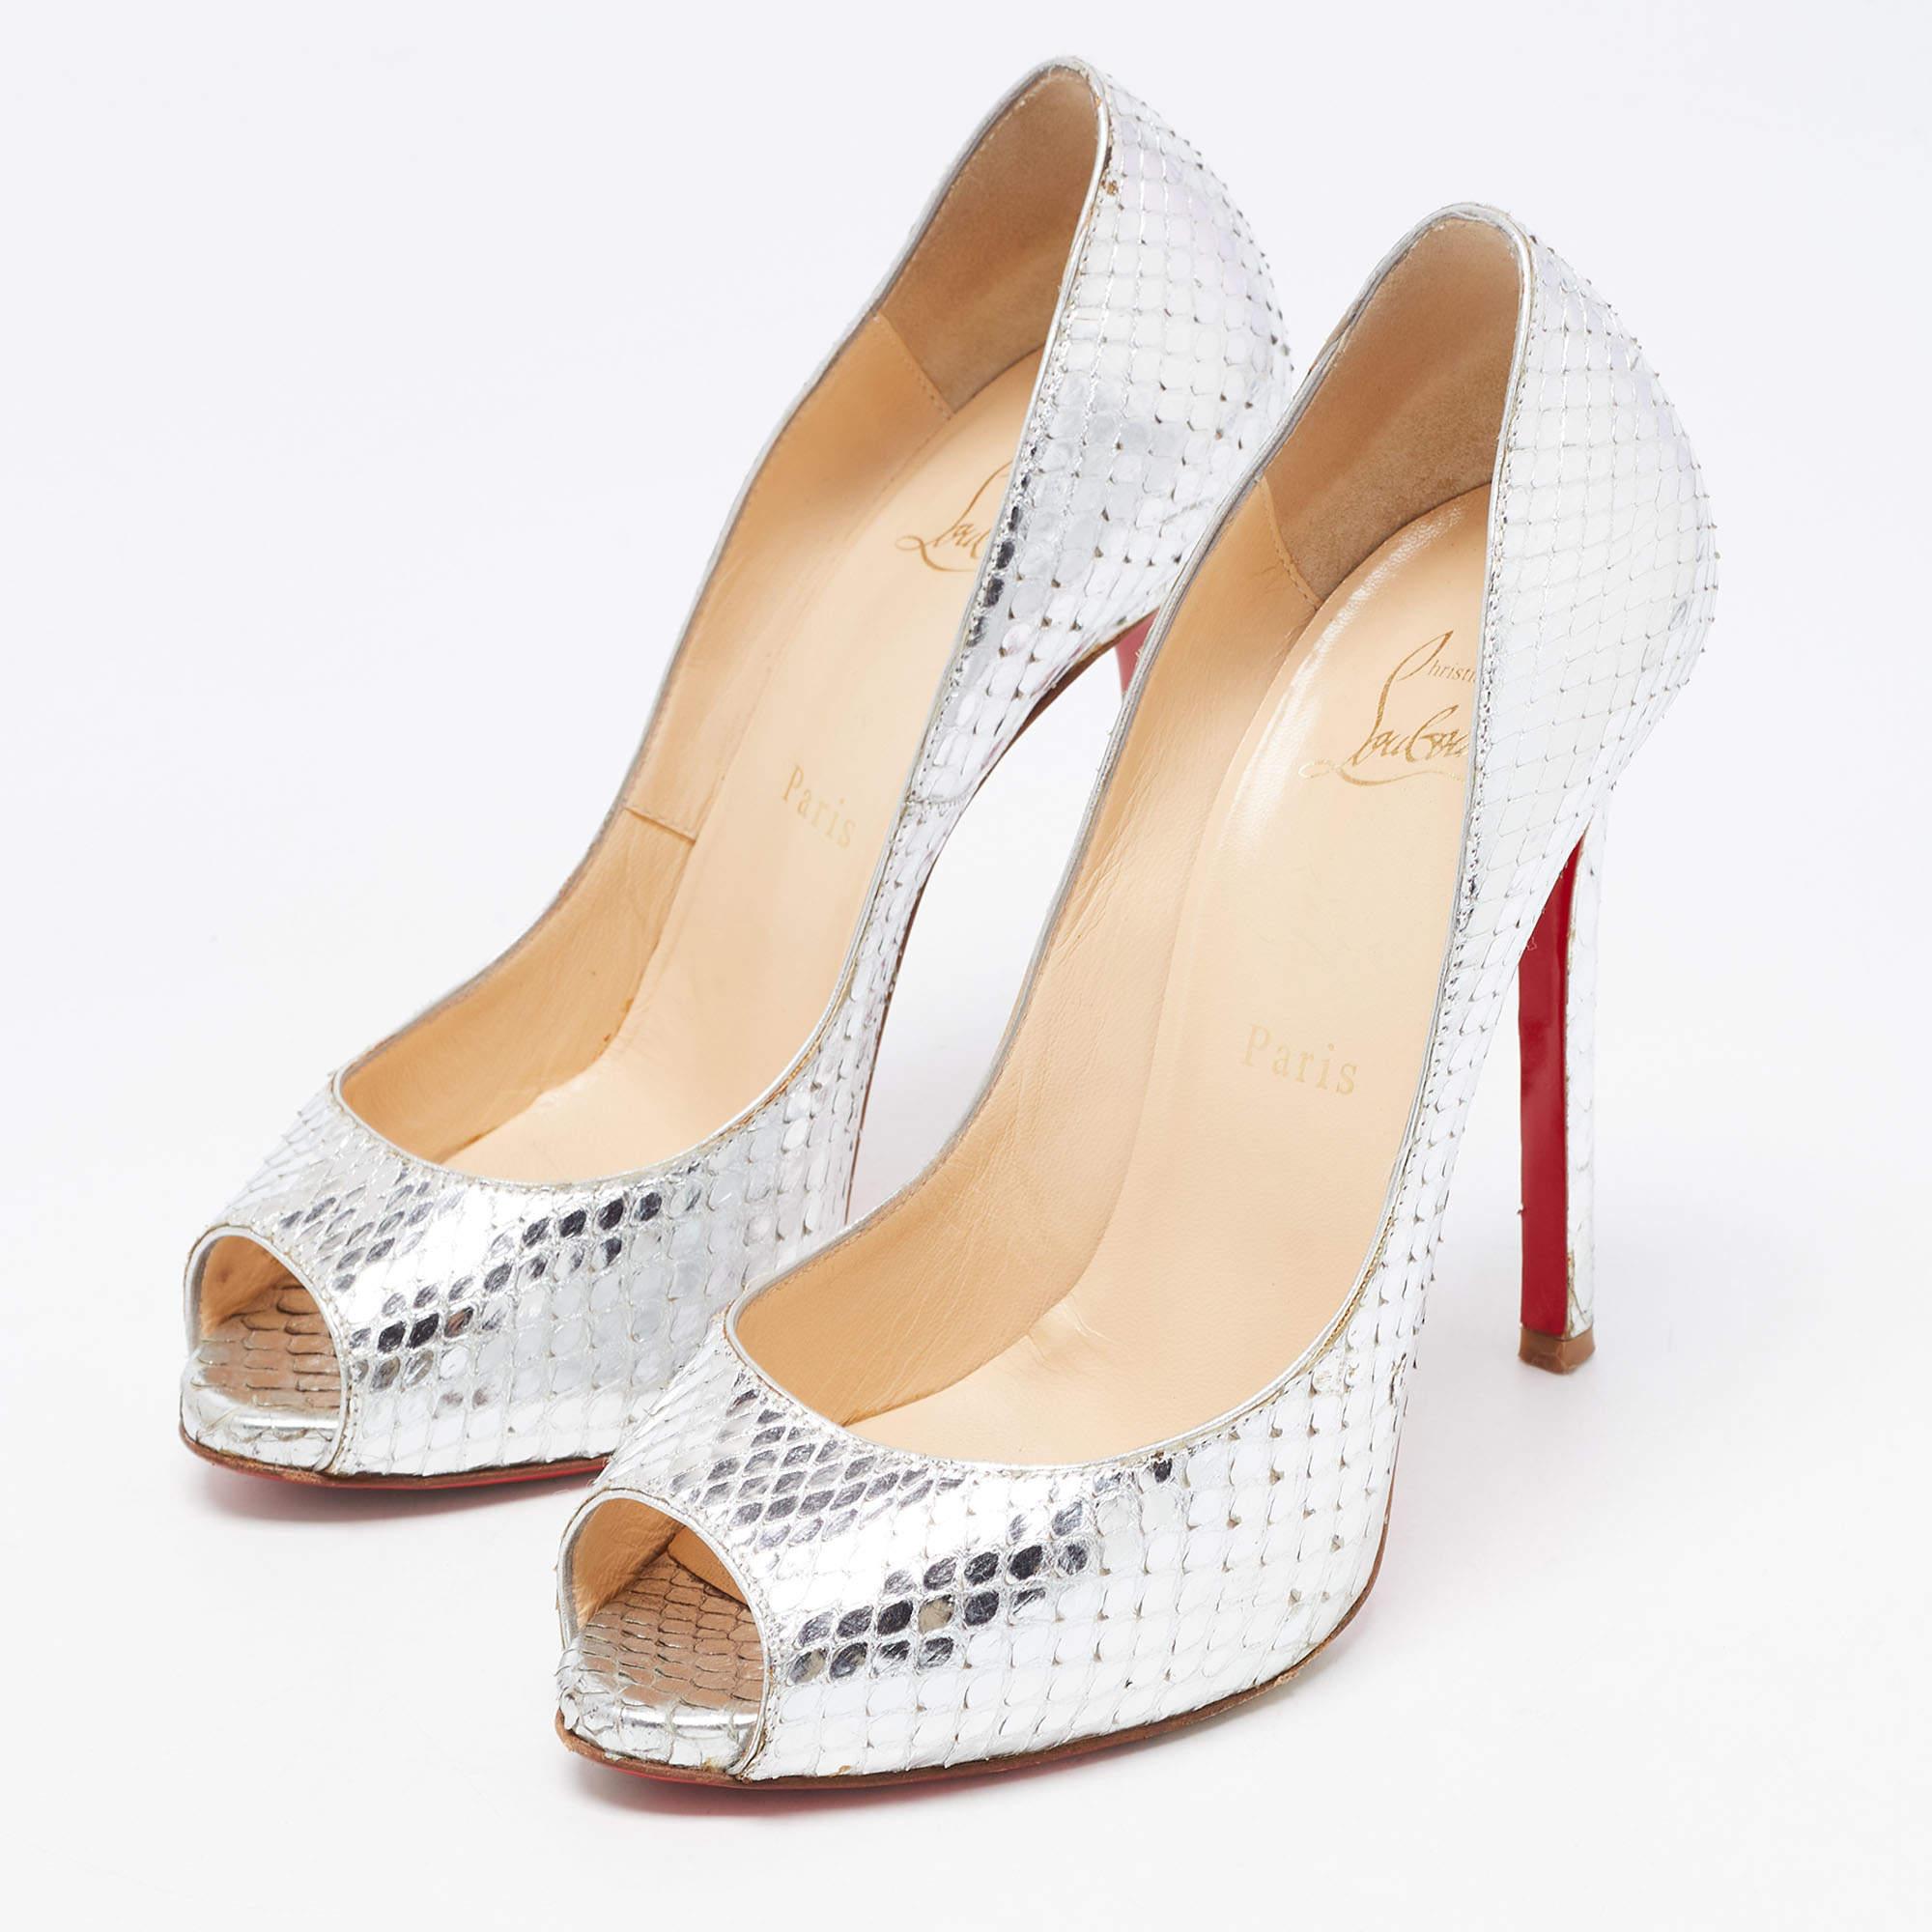 These Flo pumps from Christian Louboutin make a refined choice for evenings. Crafted from silver python leather, they feature peep toes and branded leather-lined insoles. This pair is elevated on 12 cm heels.

